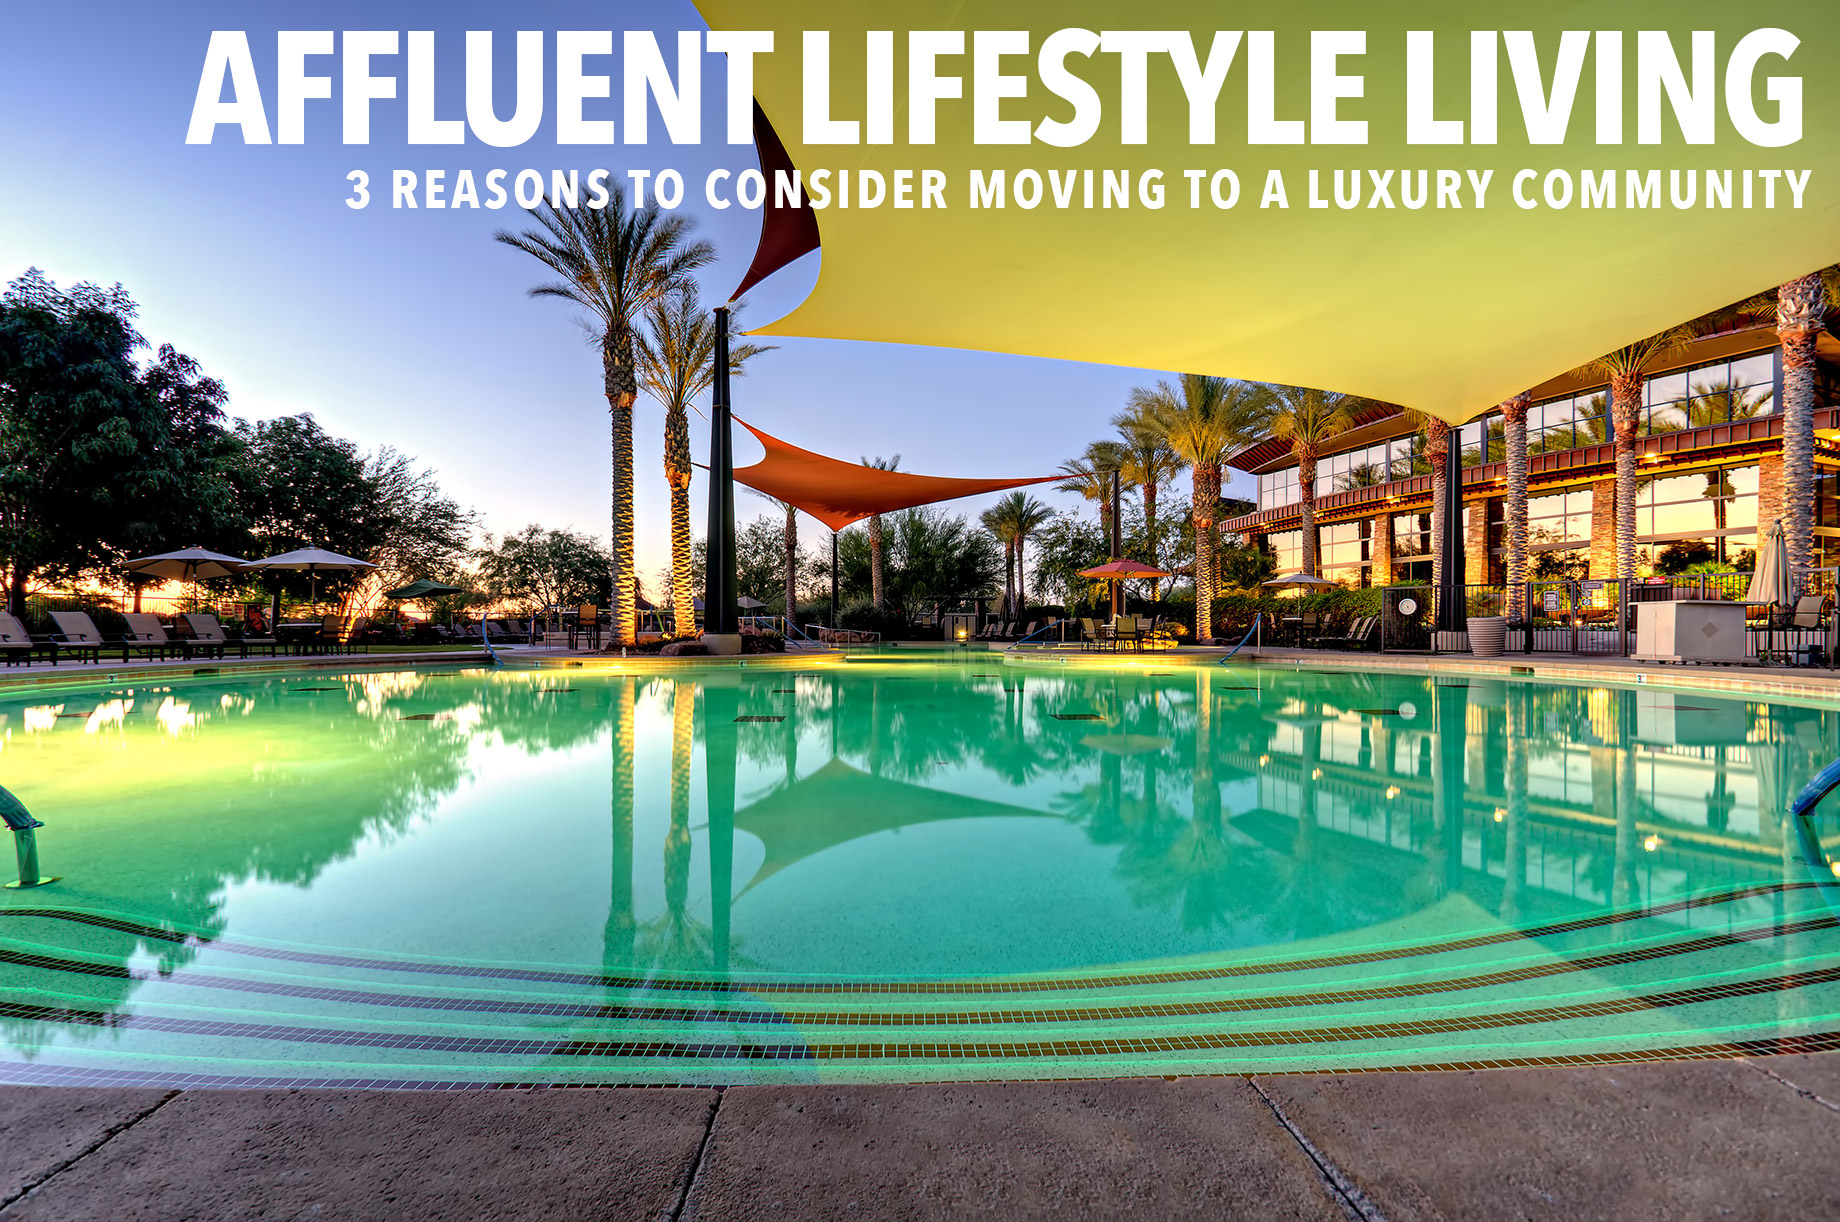 001a-Affluent-Lifestyle-Living-3-Reasons-to-Consider-Moving-to-a-Luxury-Community